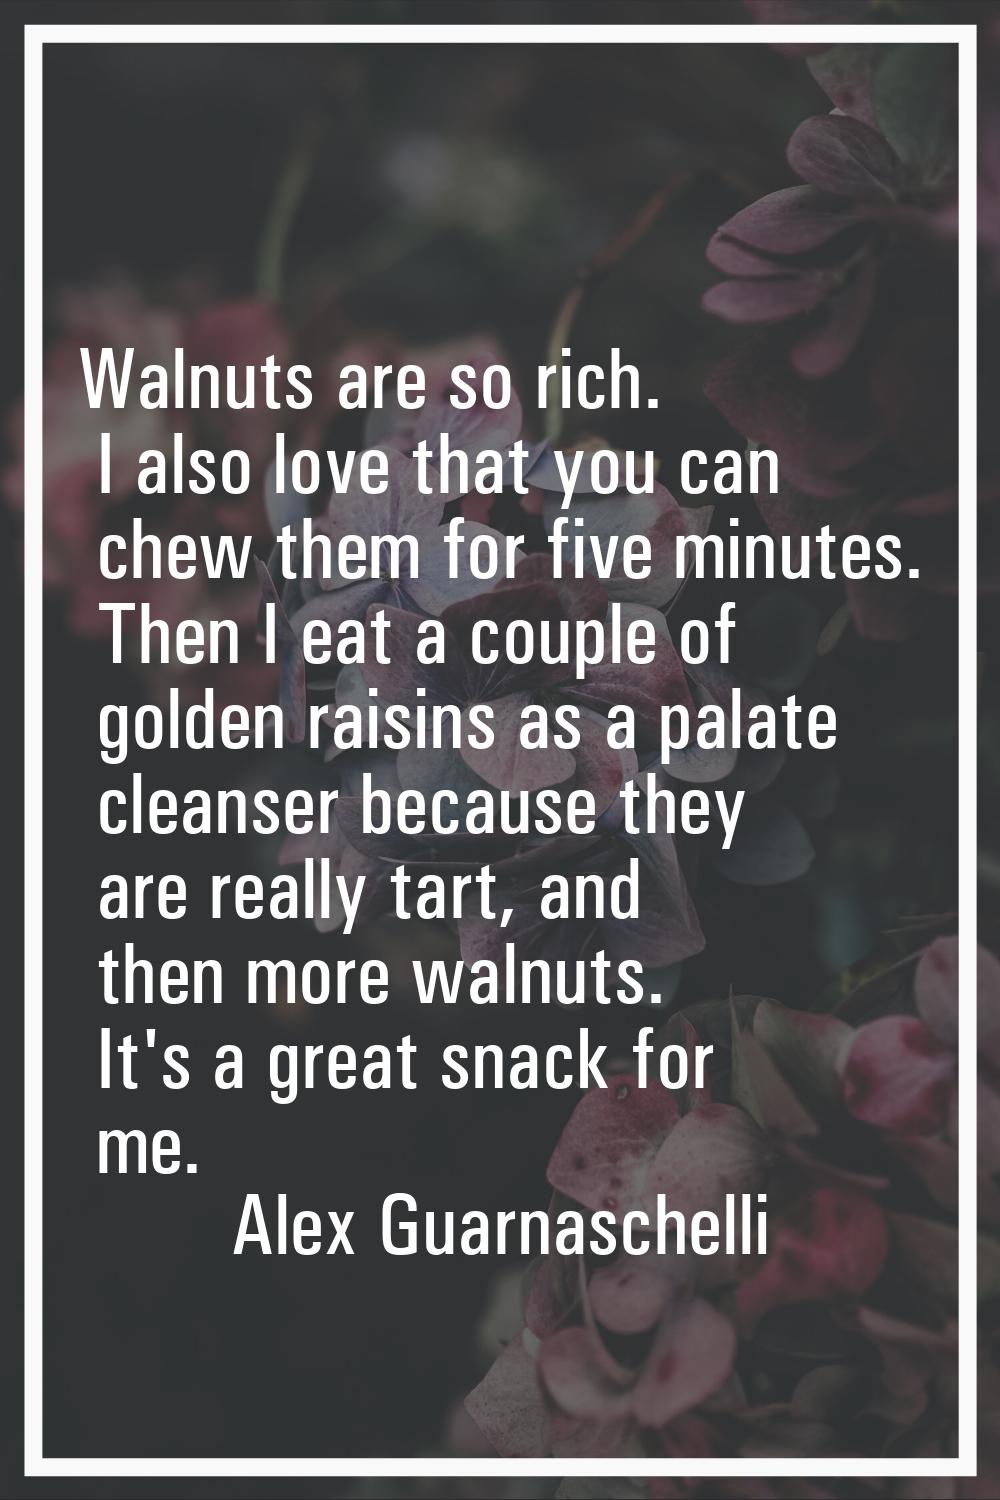 Walnuts are so rich. I also love that you can chew them for five minutes. Then I eat a couple of go